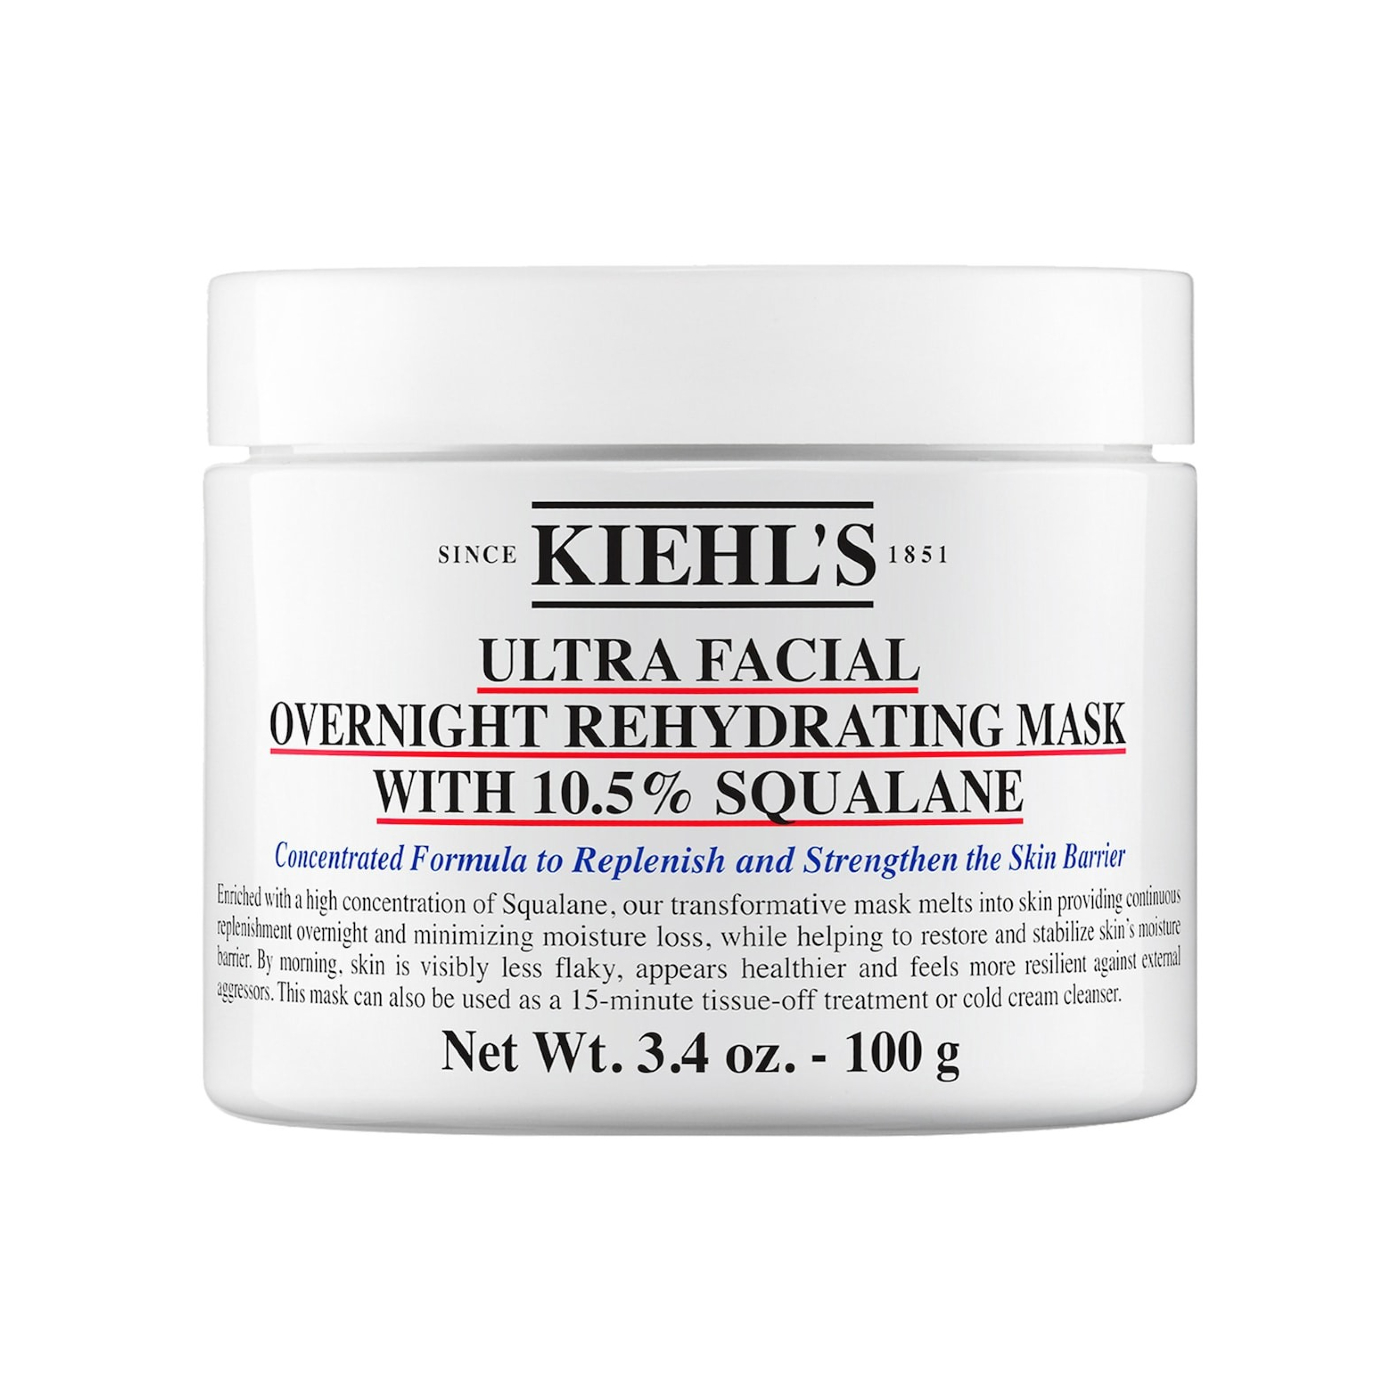 Kiehl's Since 1851 Ultra Facial Overnight Hydrating Face Mask with 10.5% Squalane